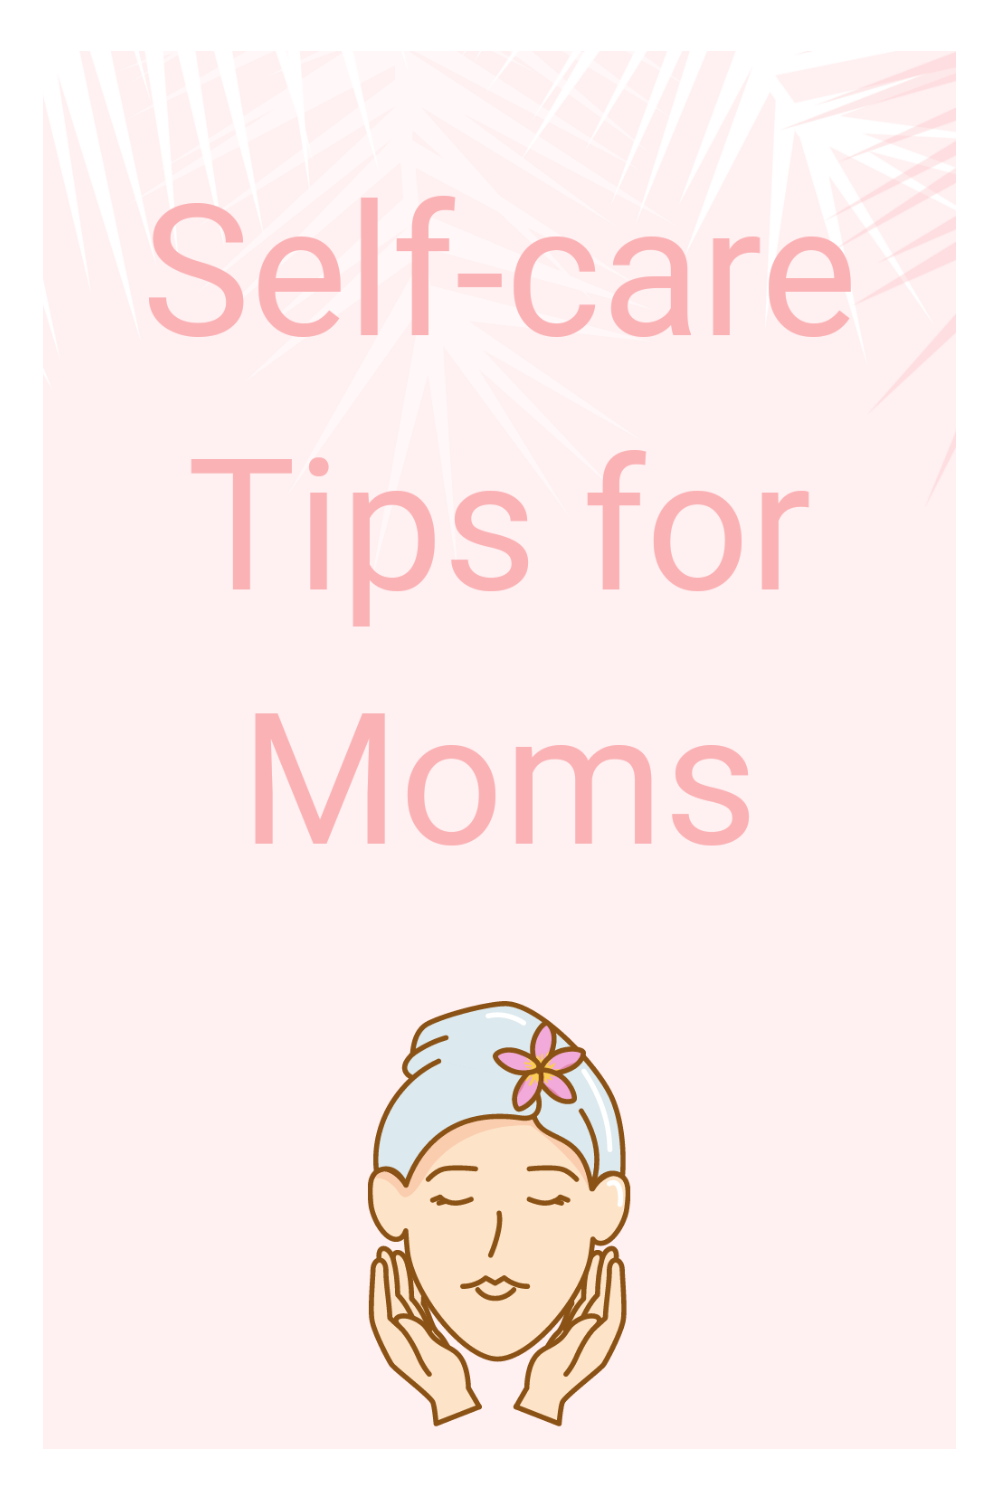 self-care tips for moms